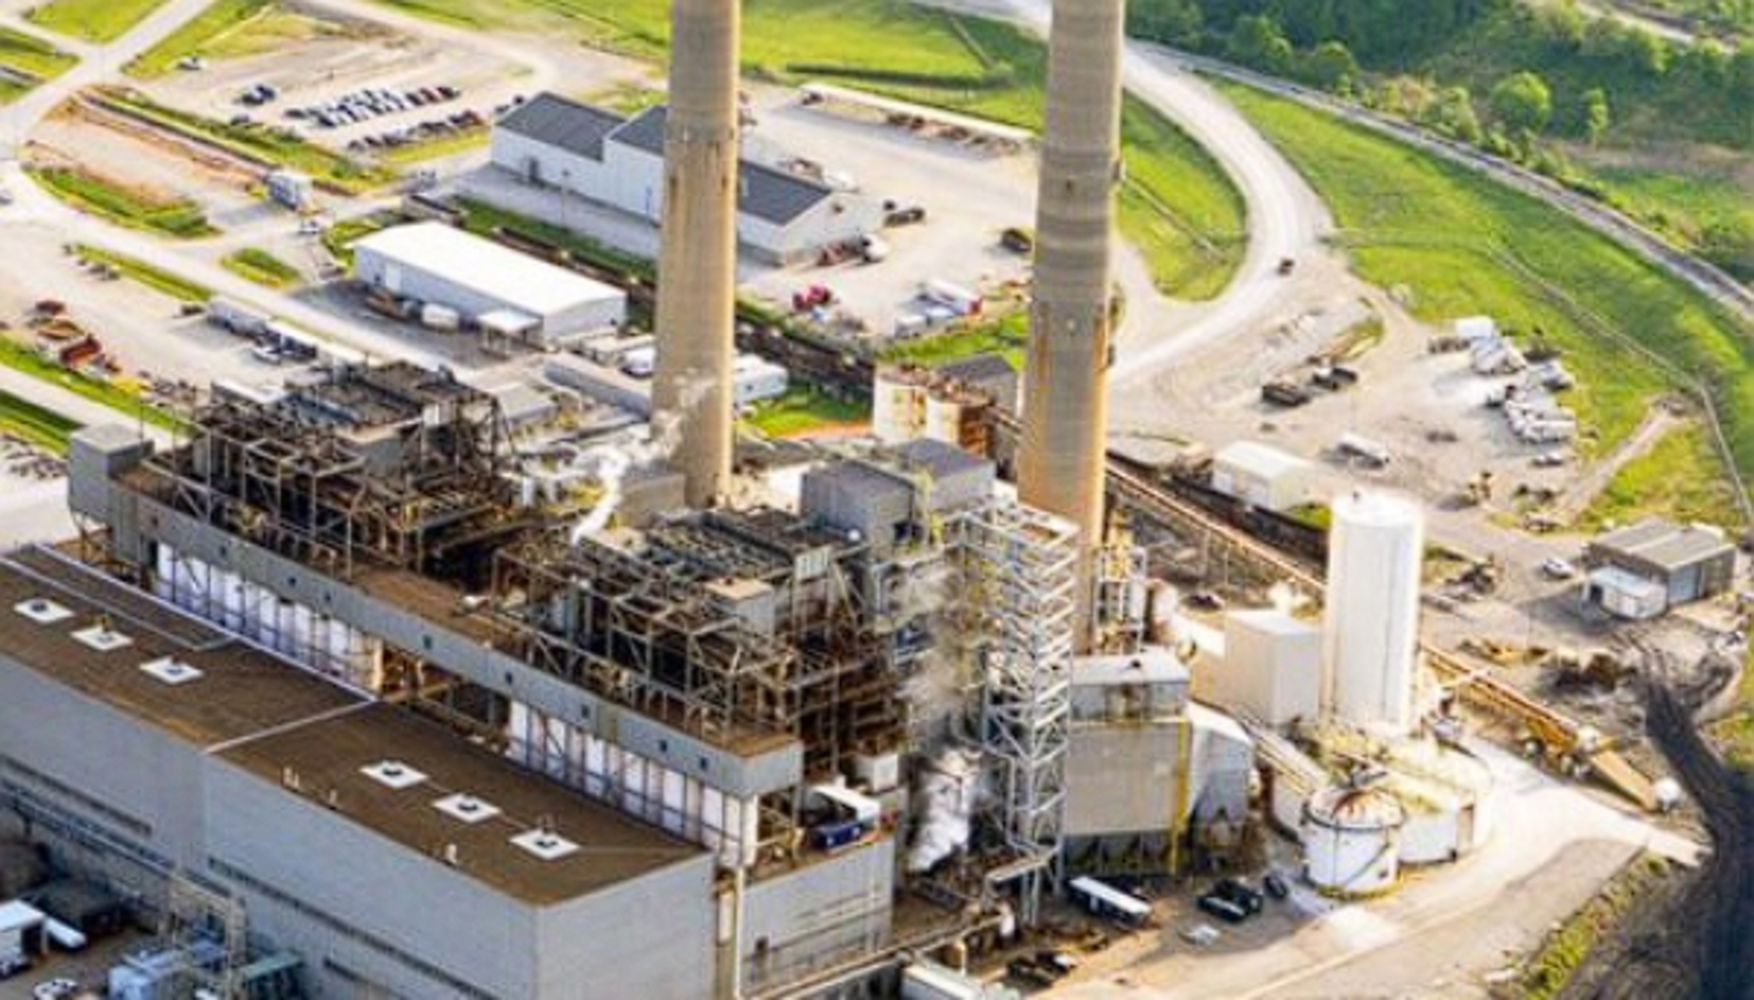 2-Day Timed Online Sale: A.B. Brown Power Plant, Complete 700-Megawatt Power Plant - DAY 1